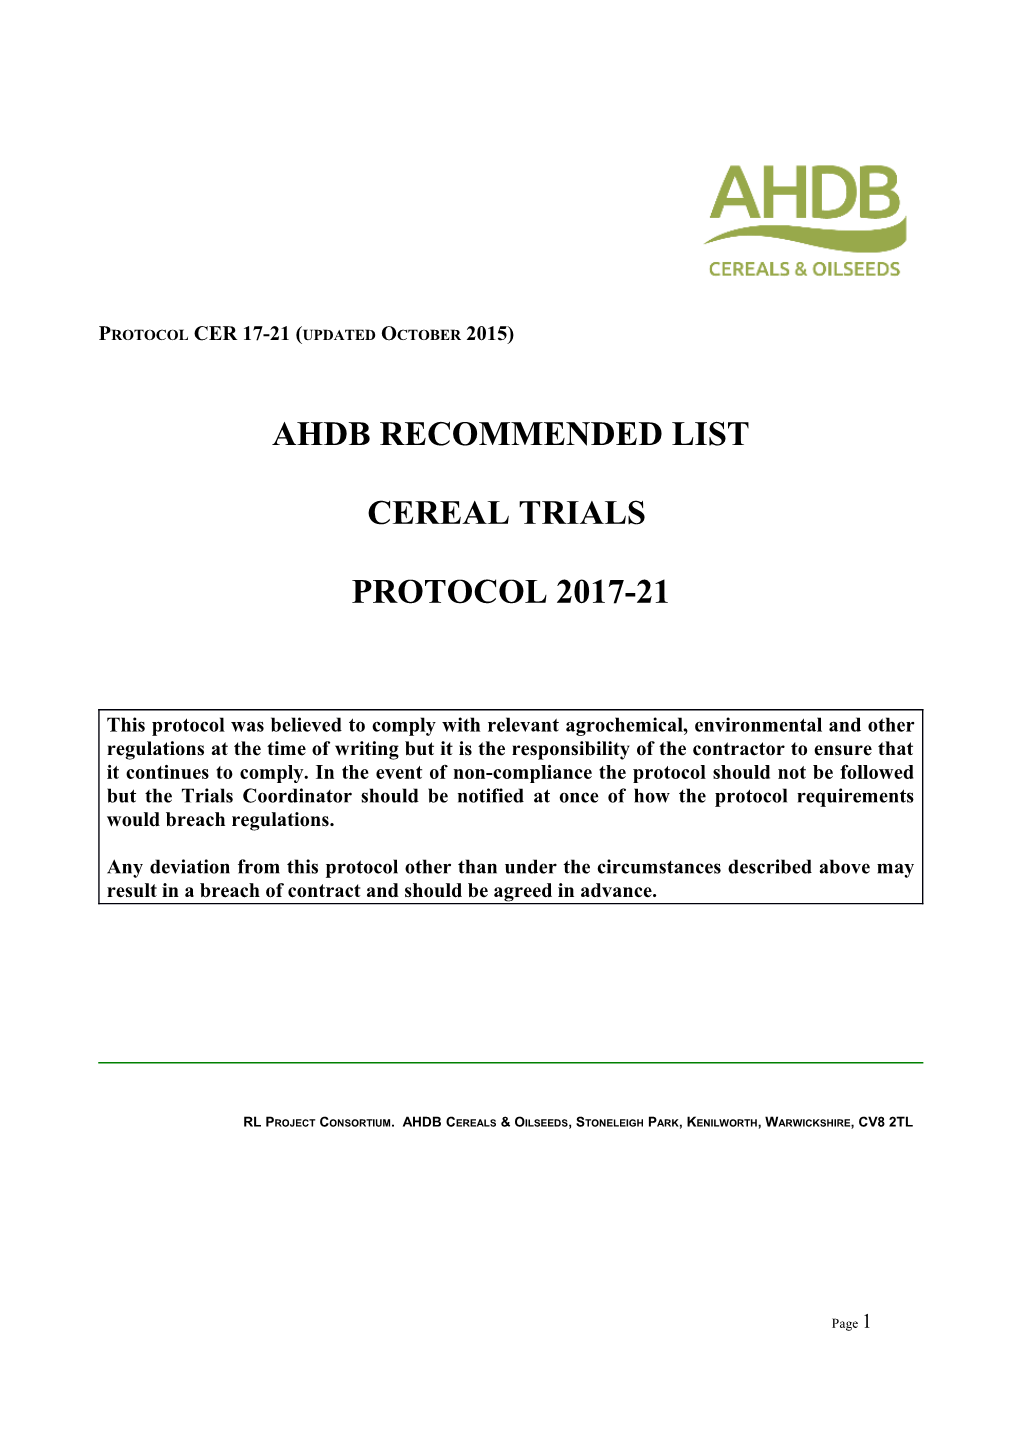 RL Protocol for Cereal Trials H2015